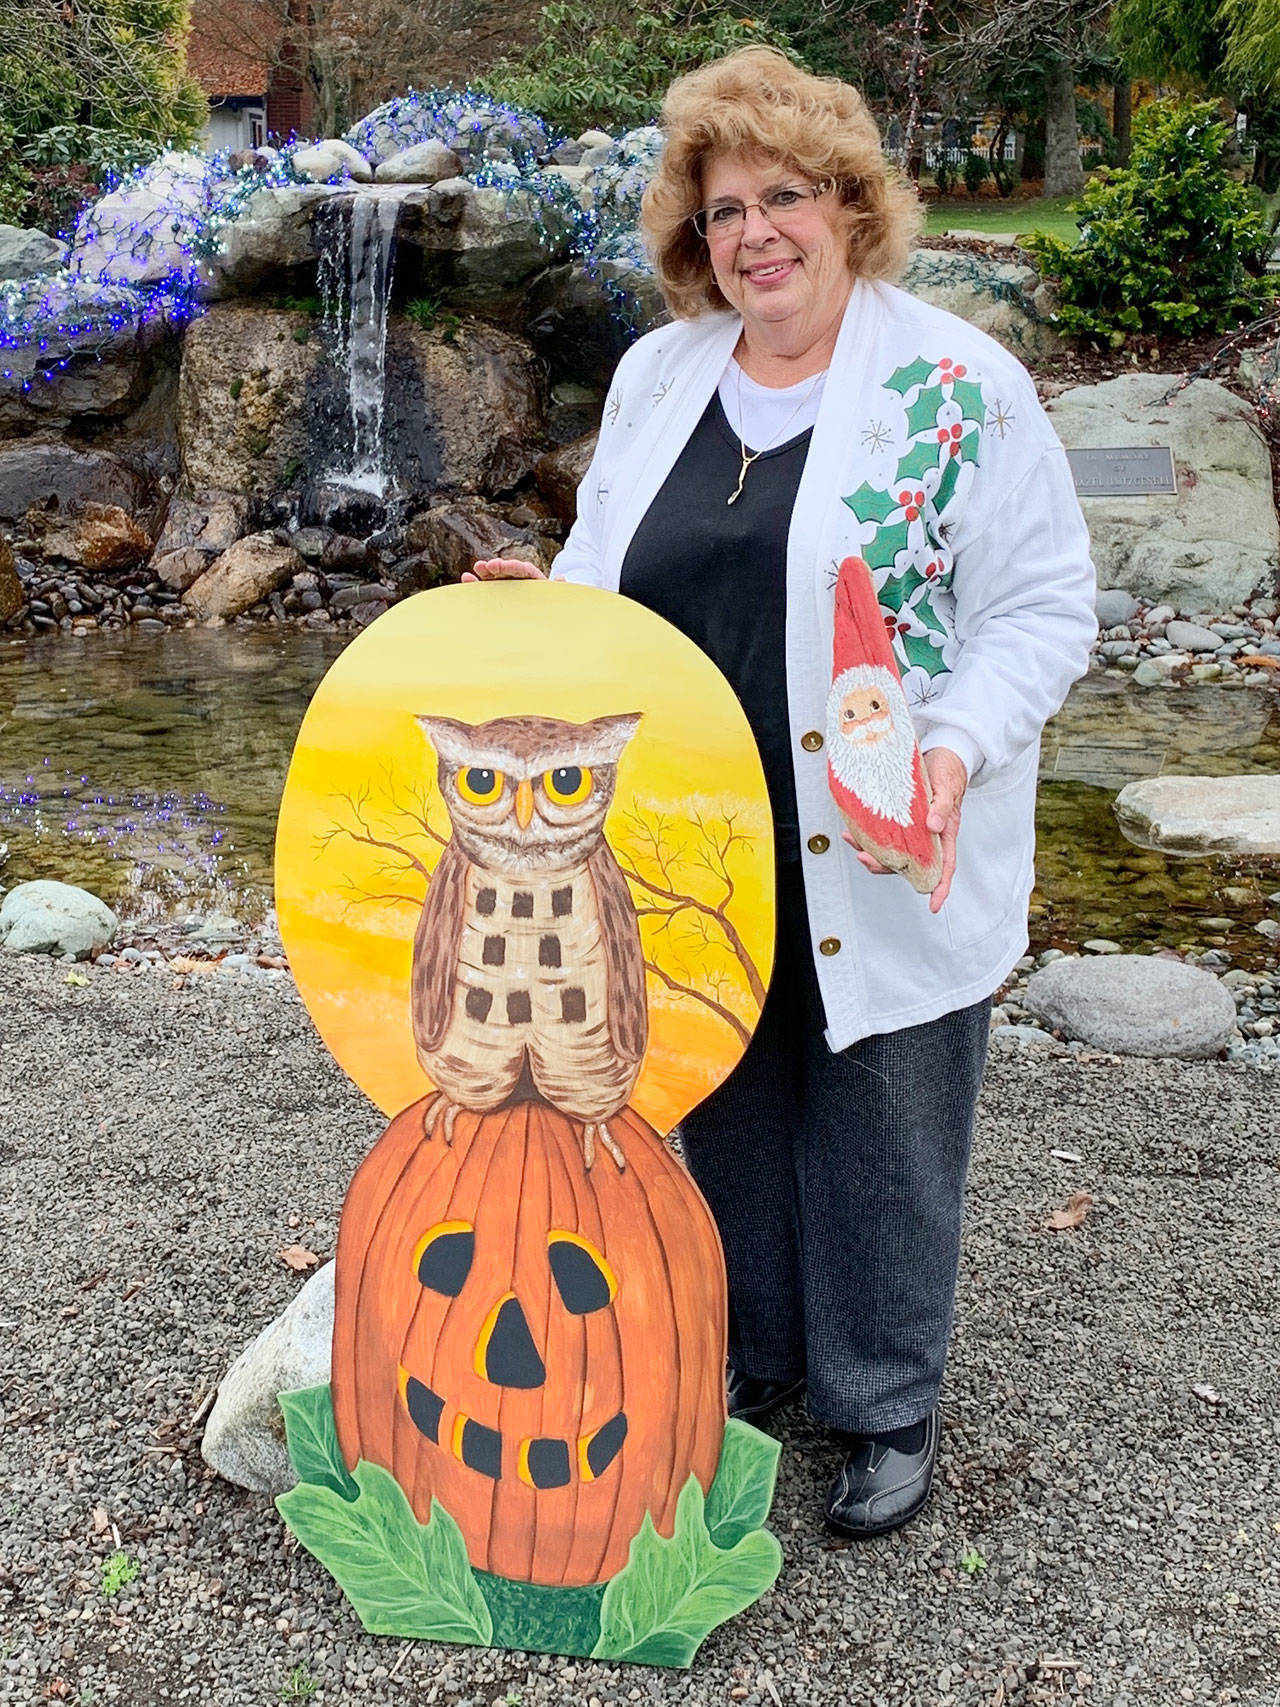 Marilynn Elliott displays whimsical Halloween and Christmas pieces she made from plywood and driftwood for her garden. Photo by Betty Harriman